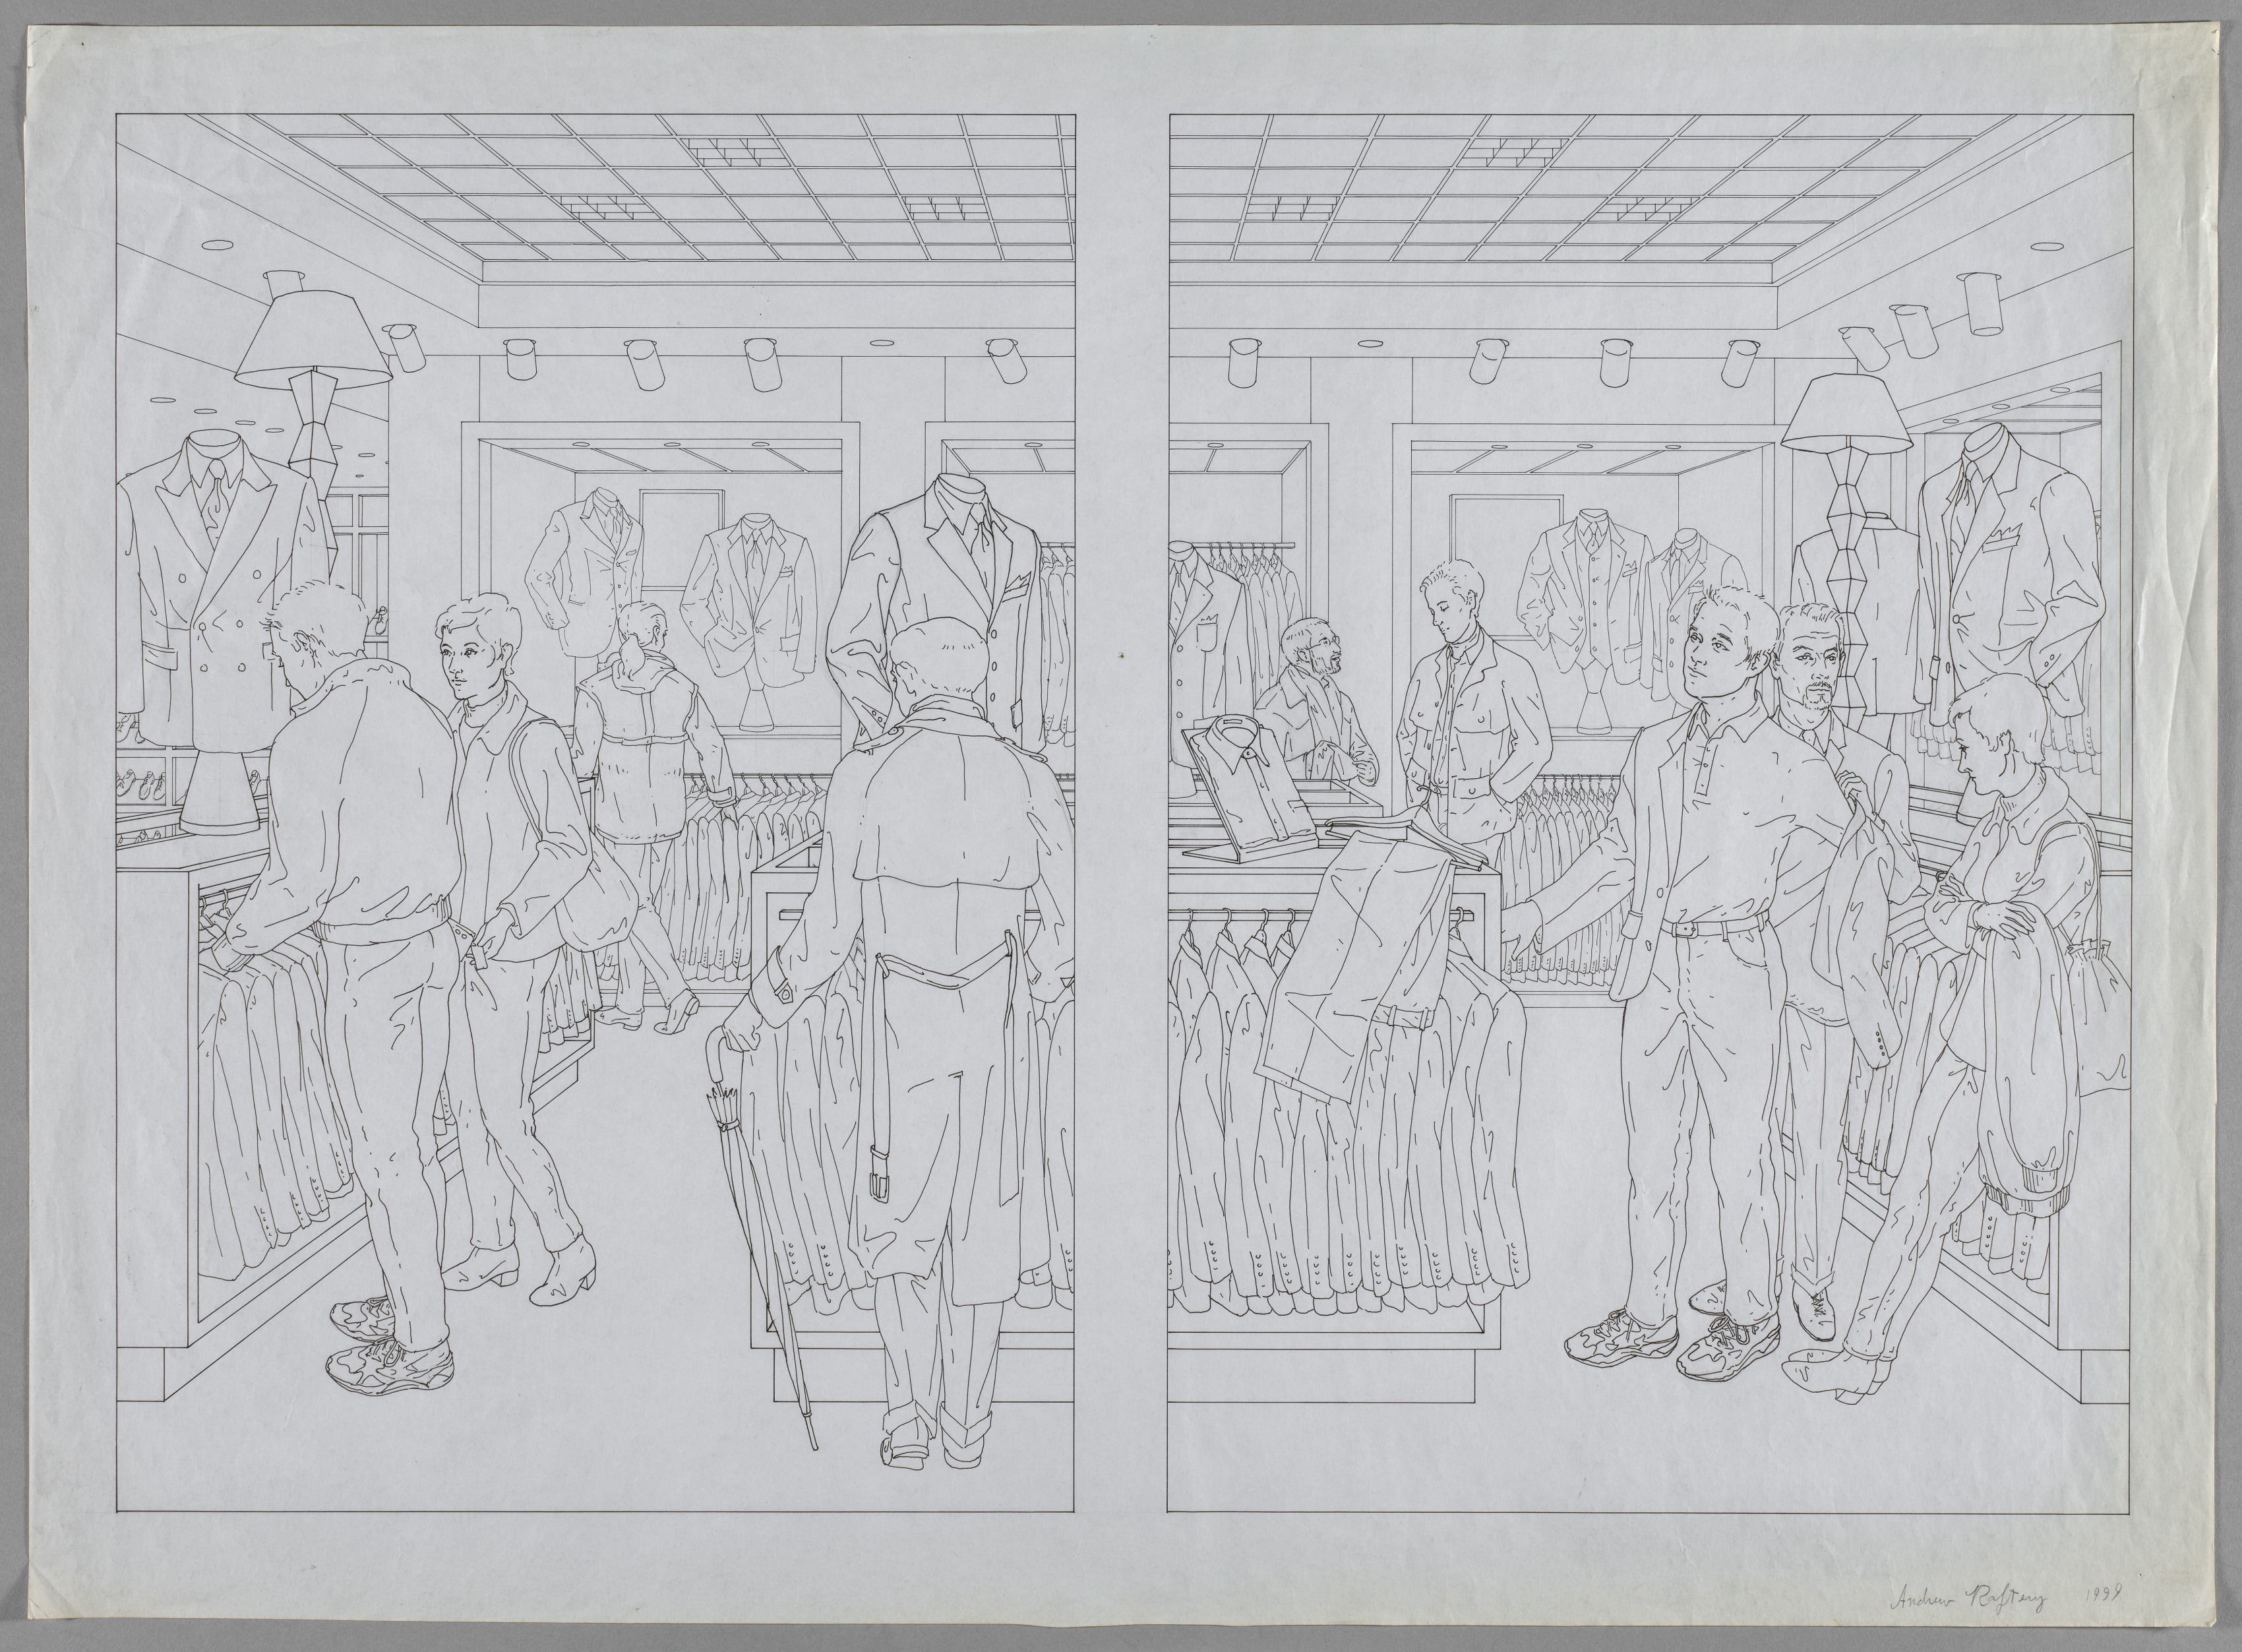 Study for Suit Shopping: An Engraved Narrative (Scenes 1 and 2)